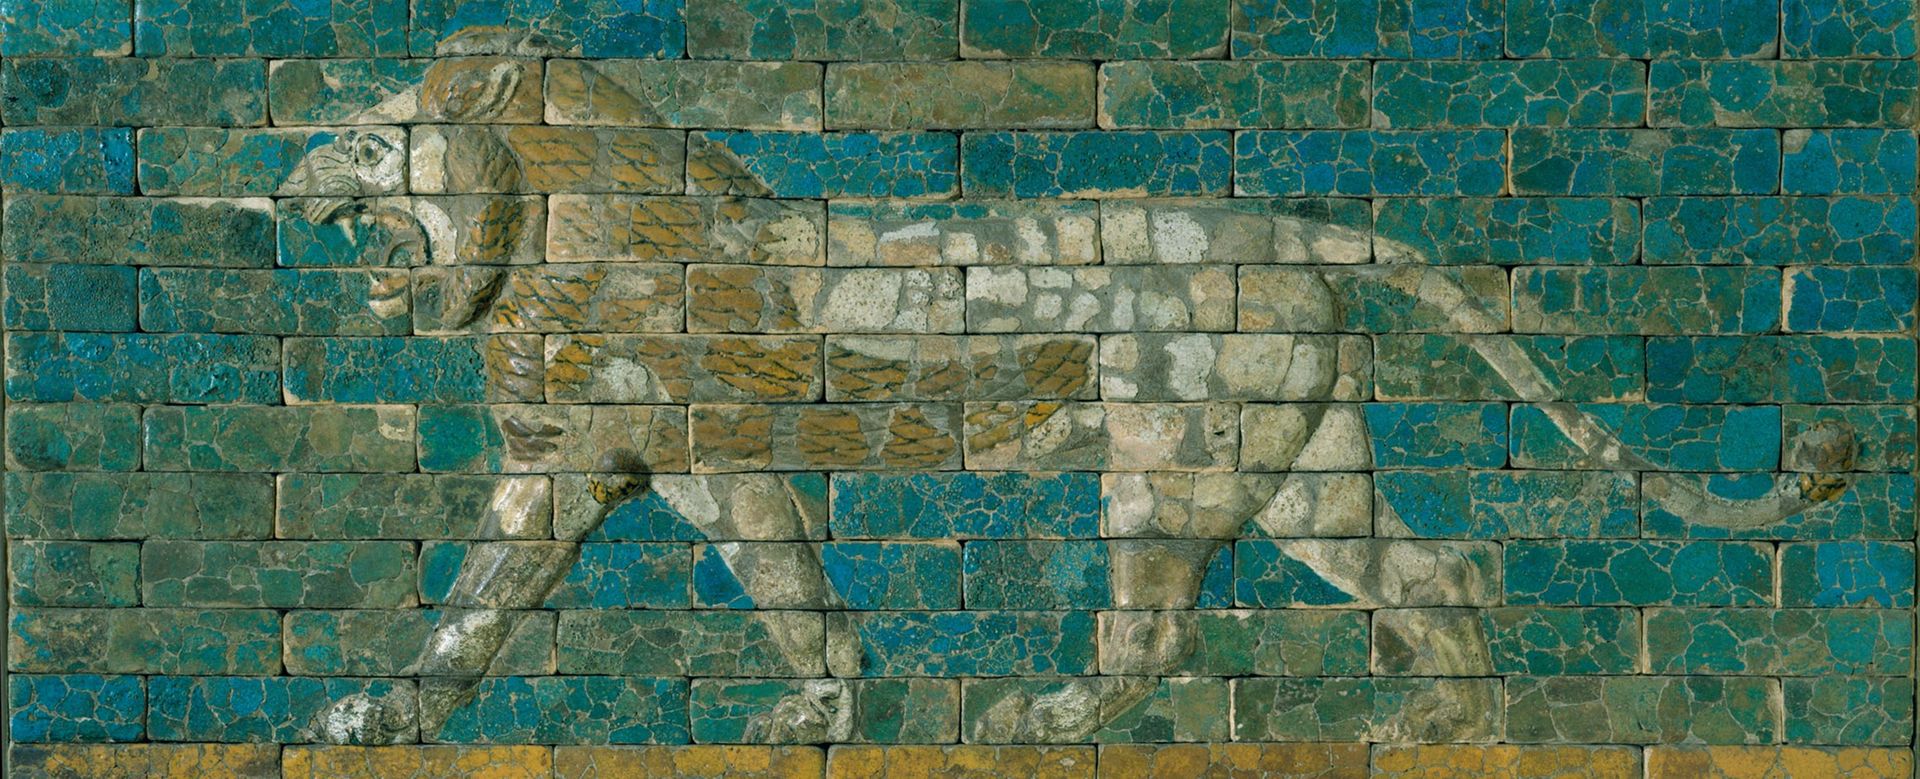 Panel with striding lion, facing left, made of blue, tan and ochre ceramic tiles